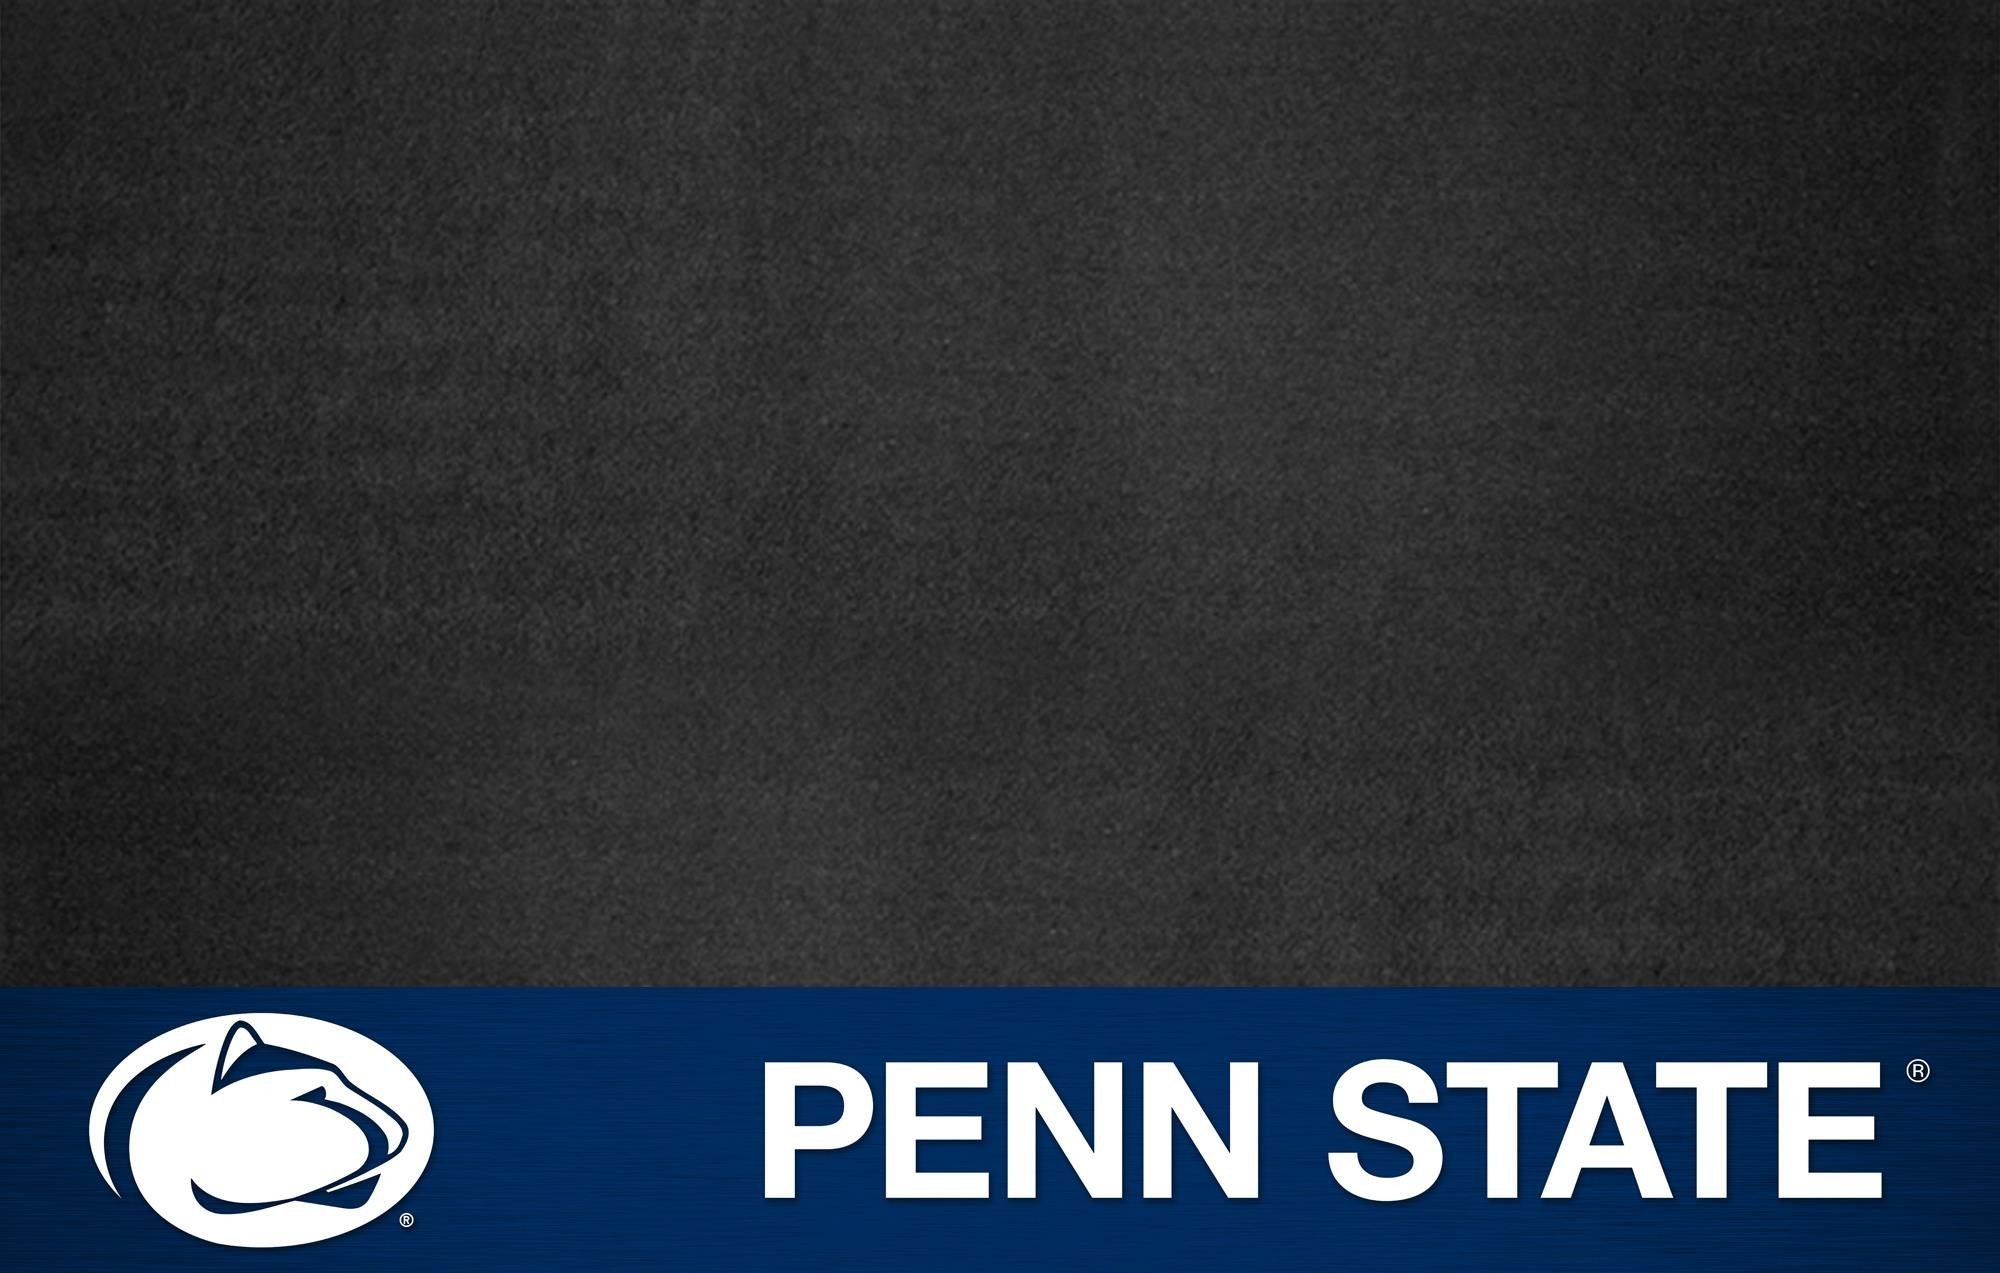 PENN STATE NITTANY LIONS college football wallpaper